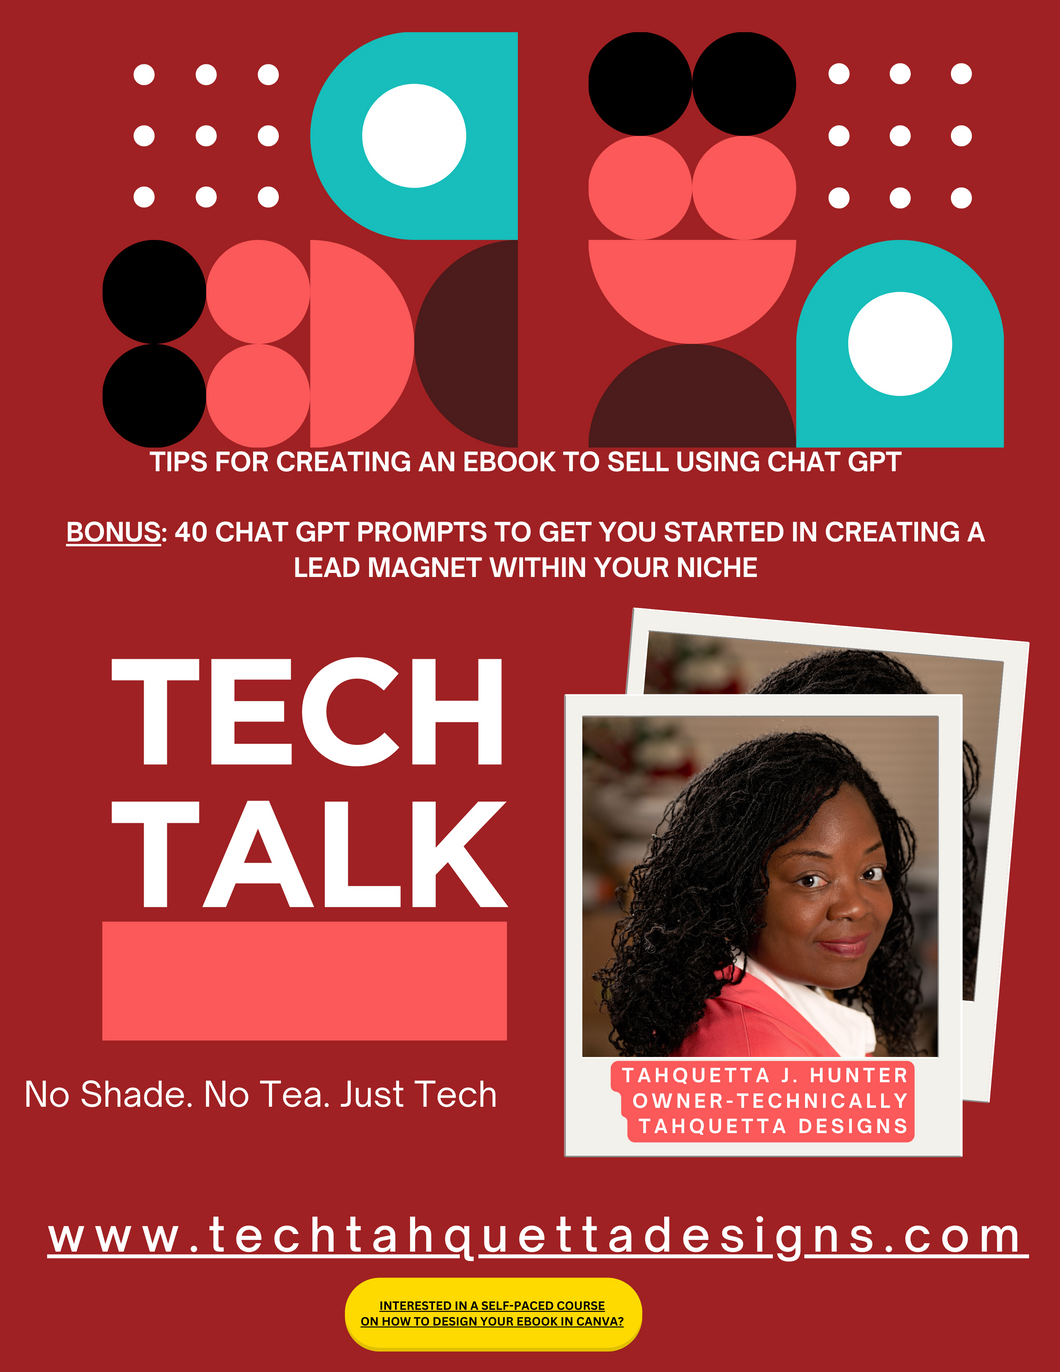 Tips for Creating an Ebook to Sell Using Chat GPT; Ebook - Technically Tahquetta Designs